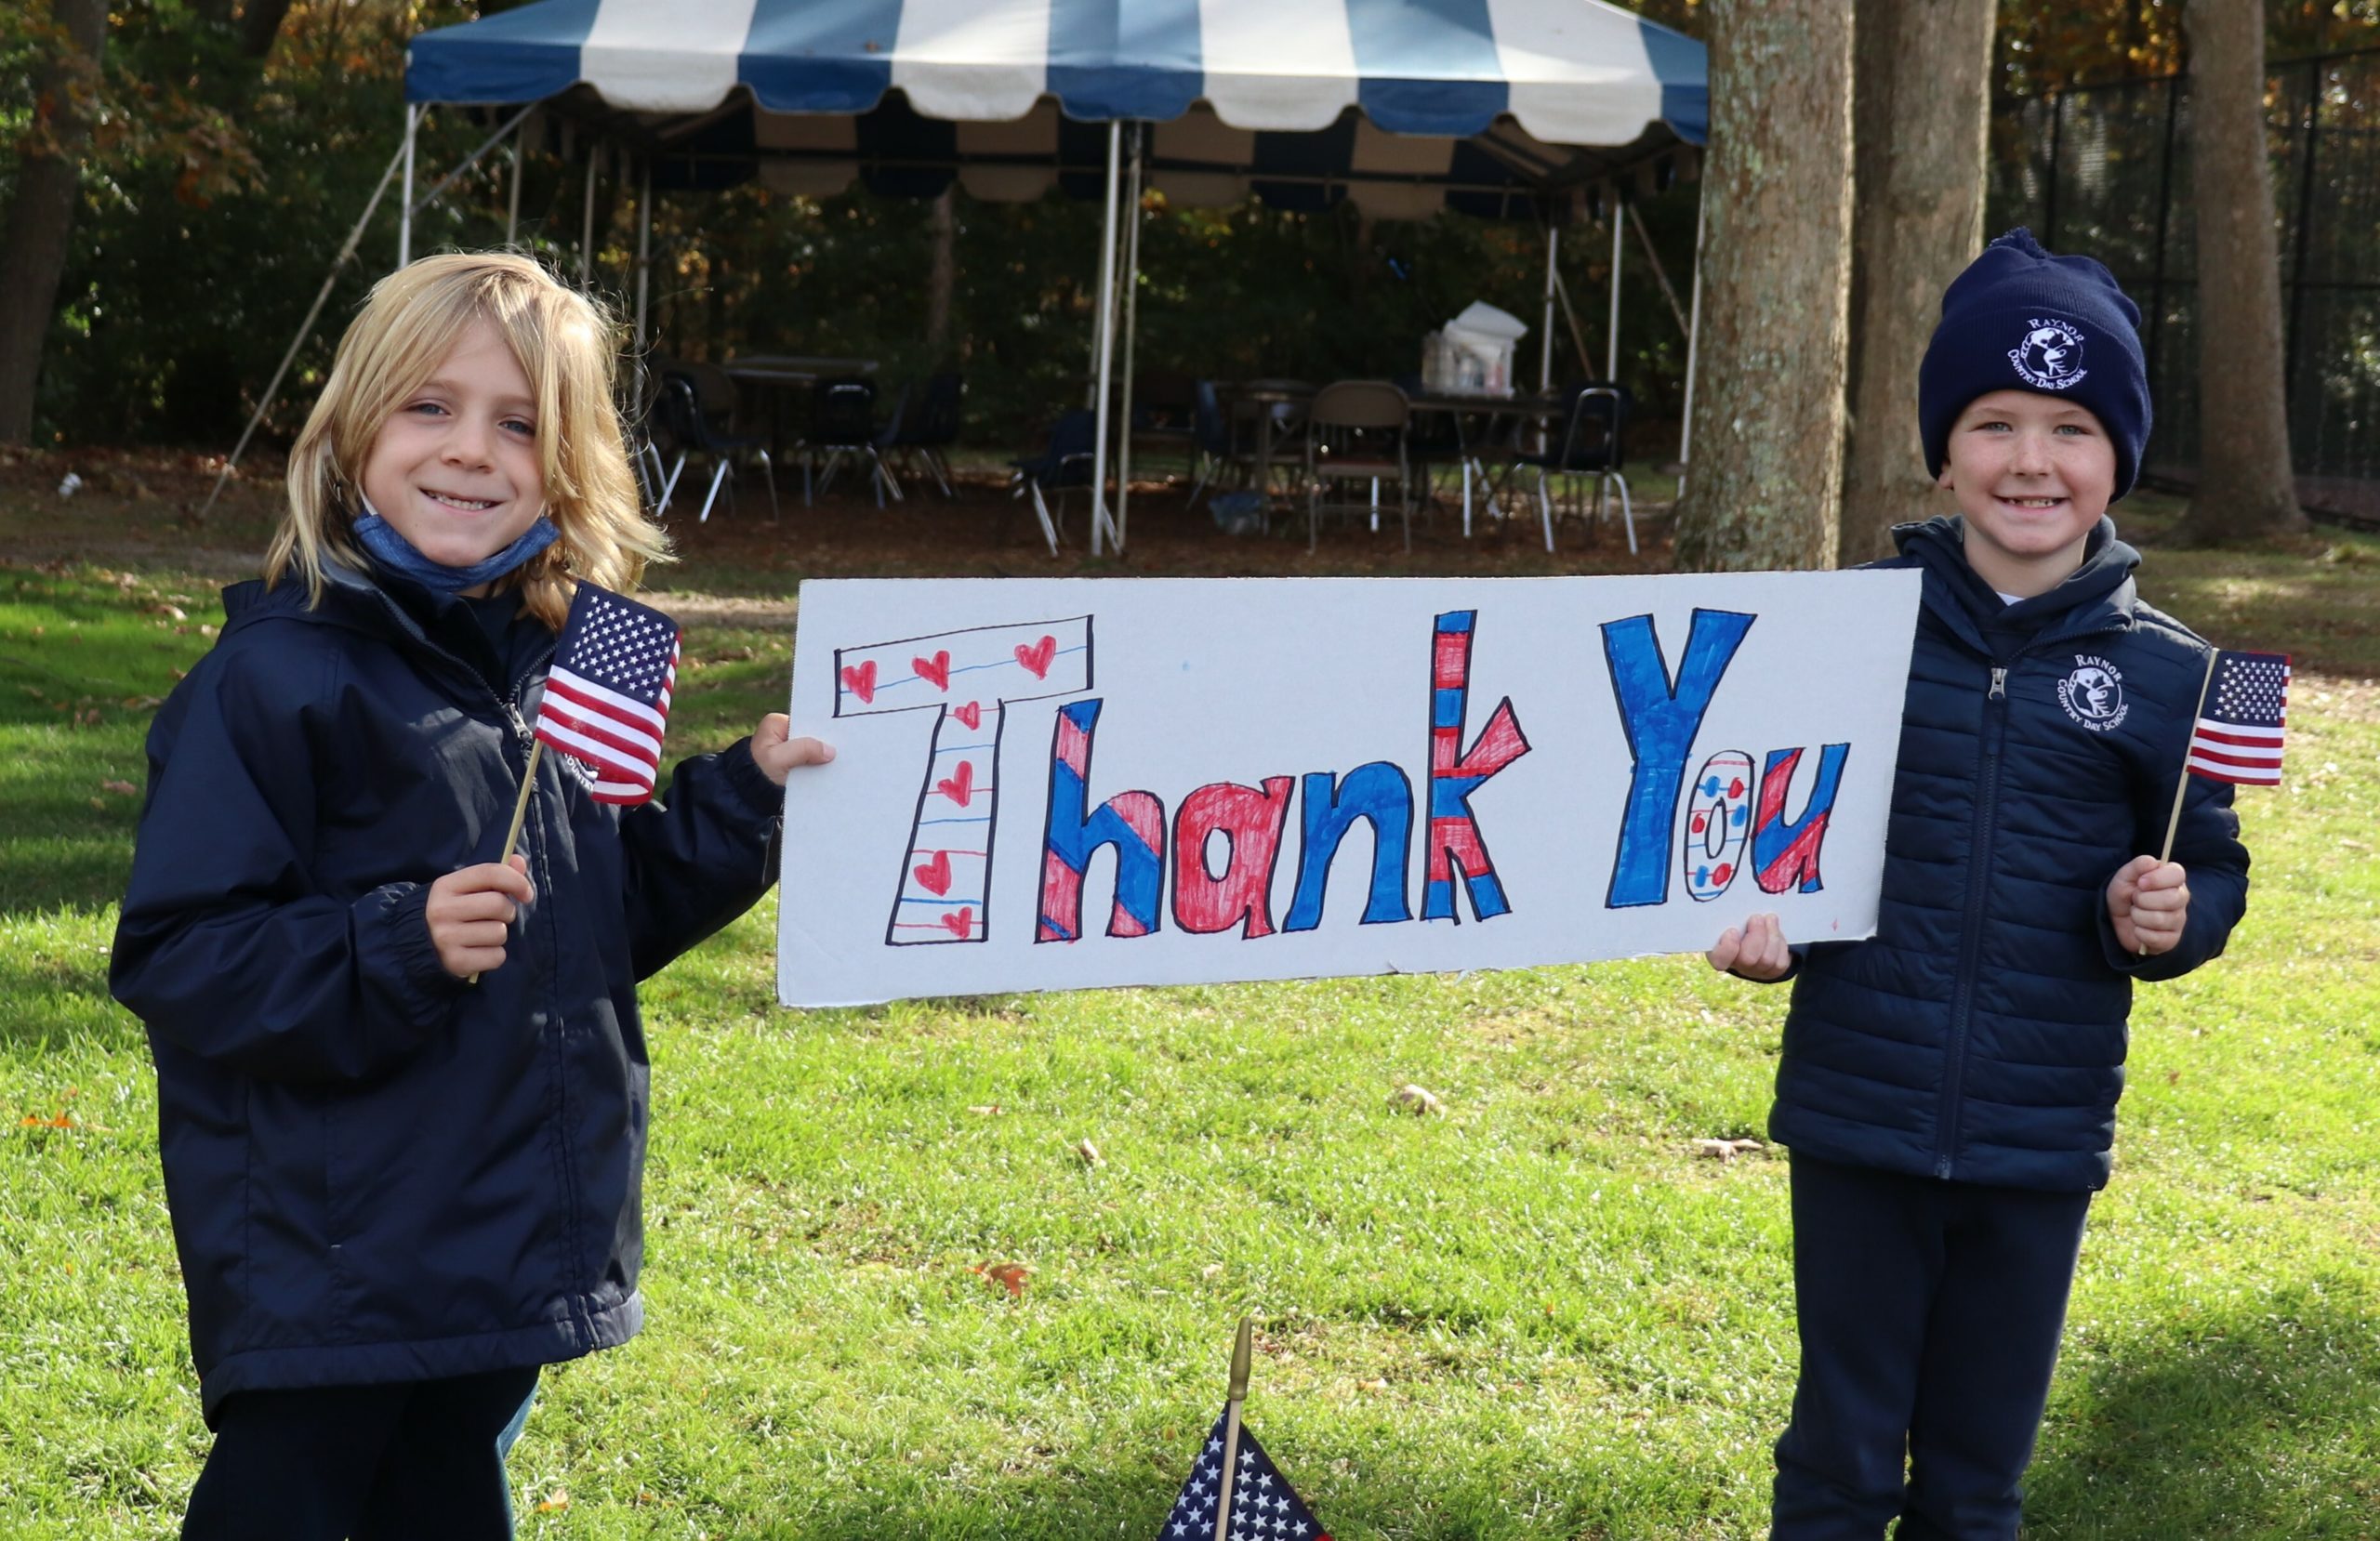 Raynor Country Day School honored  local veterans on November 4 with a drive-through celebration.  Visitors to the campus enjoyed the sights and sounds of the patriotic event which also featured hand-made decorations by the students.  Guests were also greeted by the Westhampton Beach Fire Department, the Eastport Fire Department, the Southampton Town Police Department, and the Patriot Guard Riders.  At the conclusion of the event, all veterans were provided with a complimentary lunch, thank-you card hand crafted by students and a gift.  COURTESY RAYNOR COUNTRY DAY SCHOOL